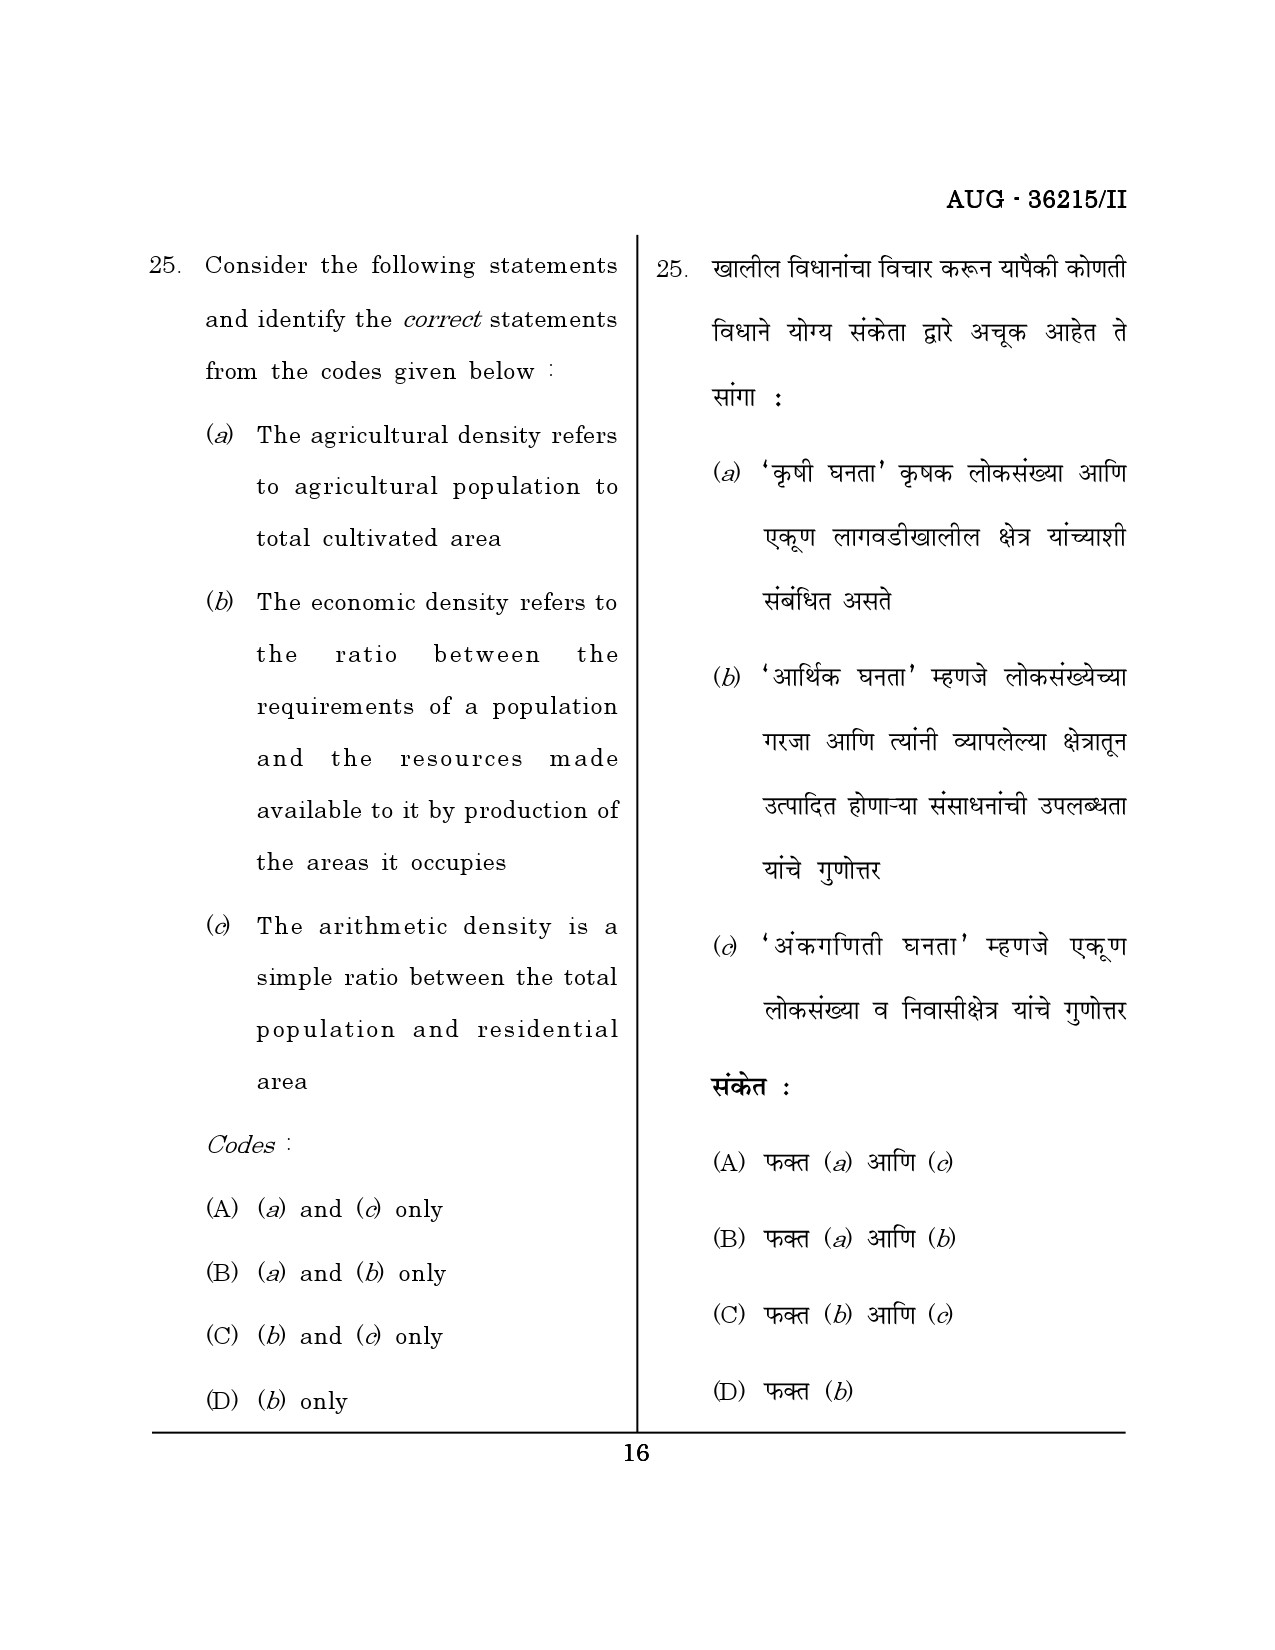 Maharashtra SET Geography Question Paper II August 2015 15